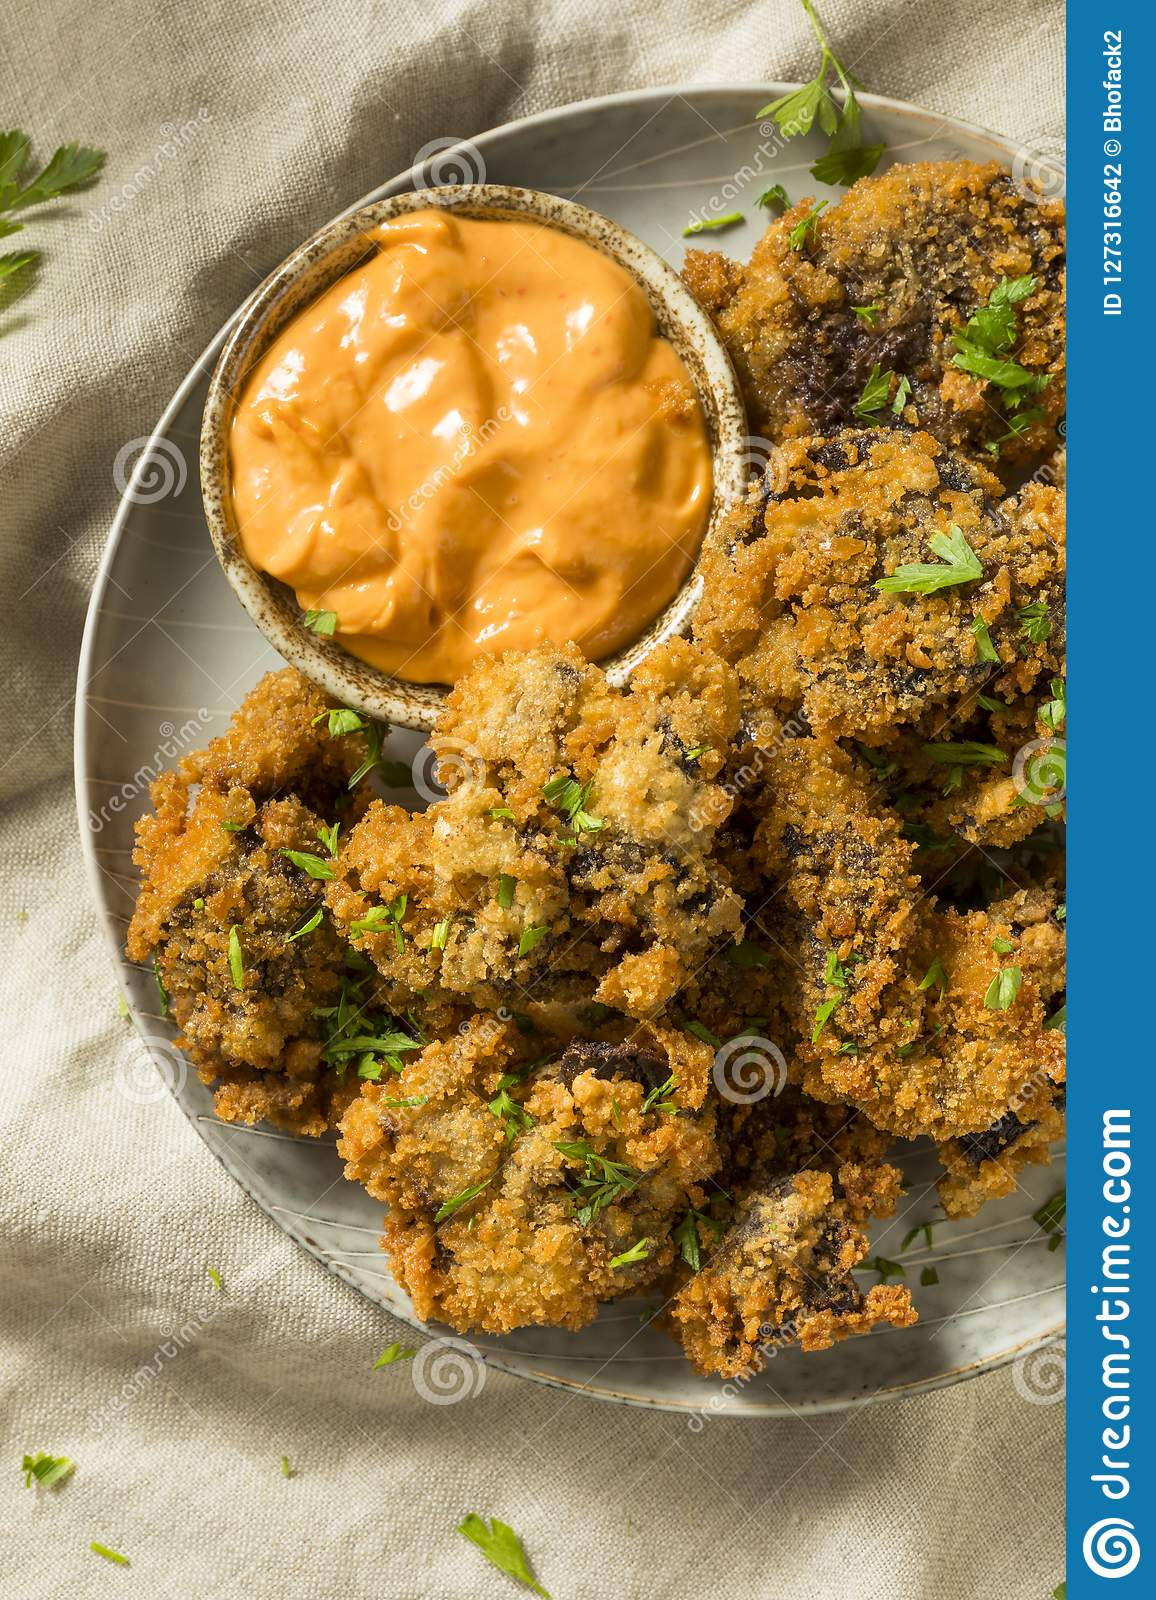 Top 20 Deep Fried Chicken Livers - Best Recipes Ideas and Collections